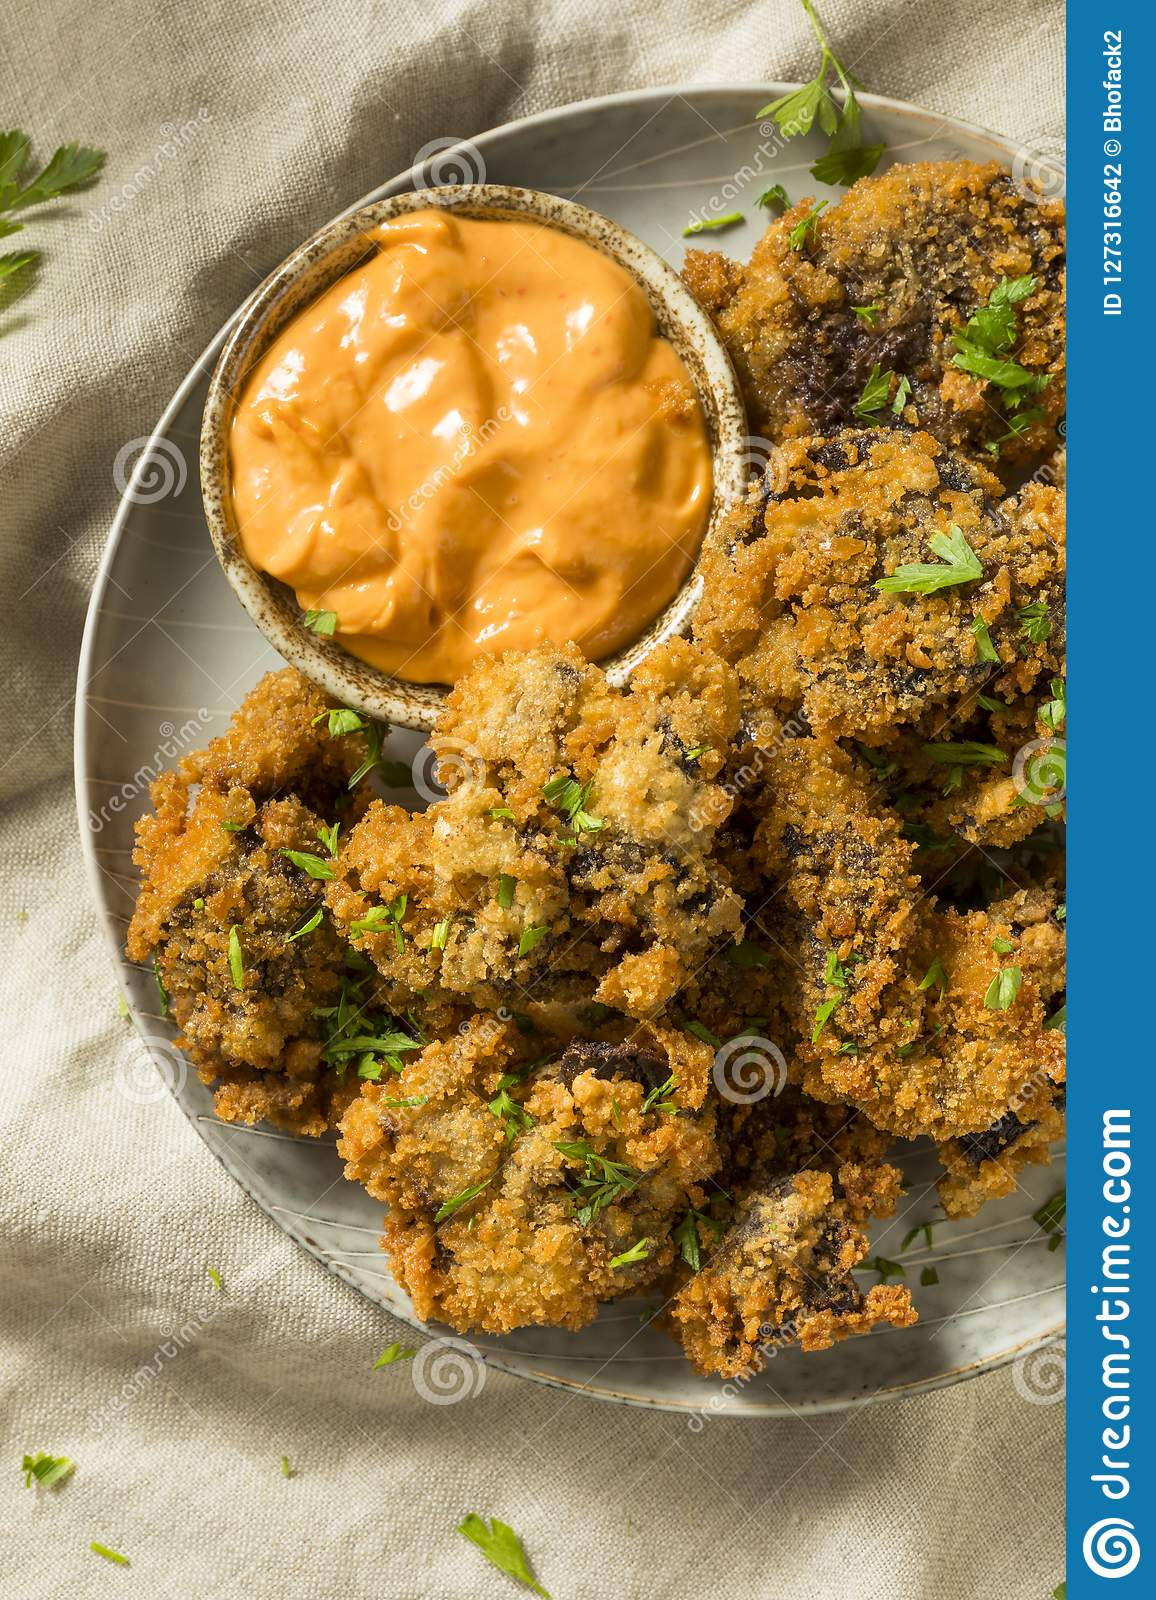 Top 20 Deep Fried Chicken Livers - Best Recipes Ideas and Collections